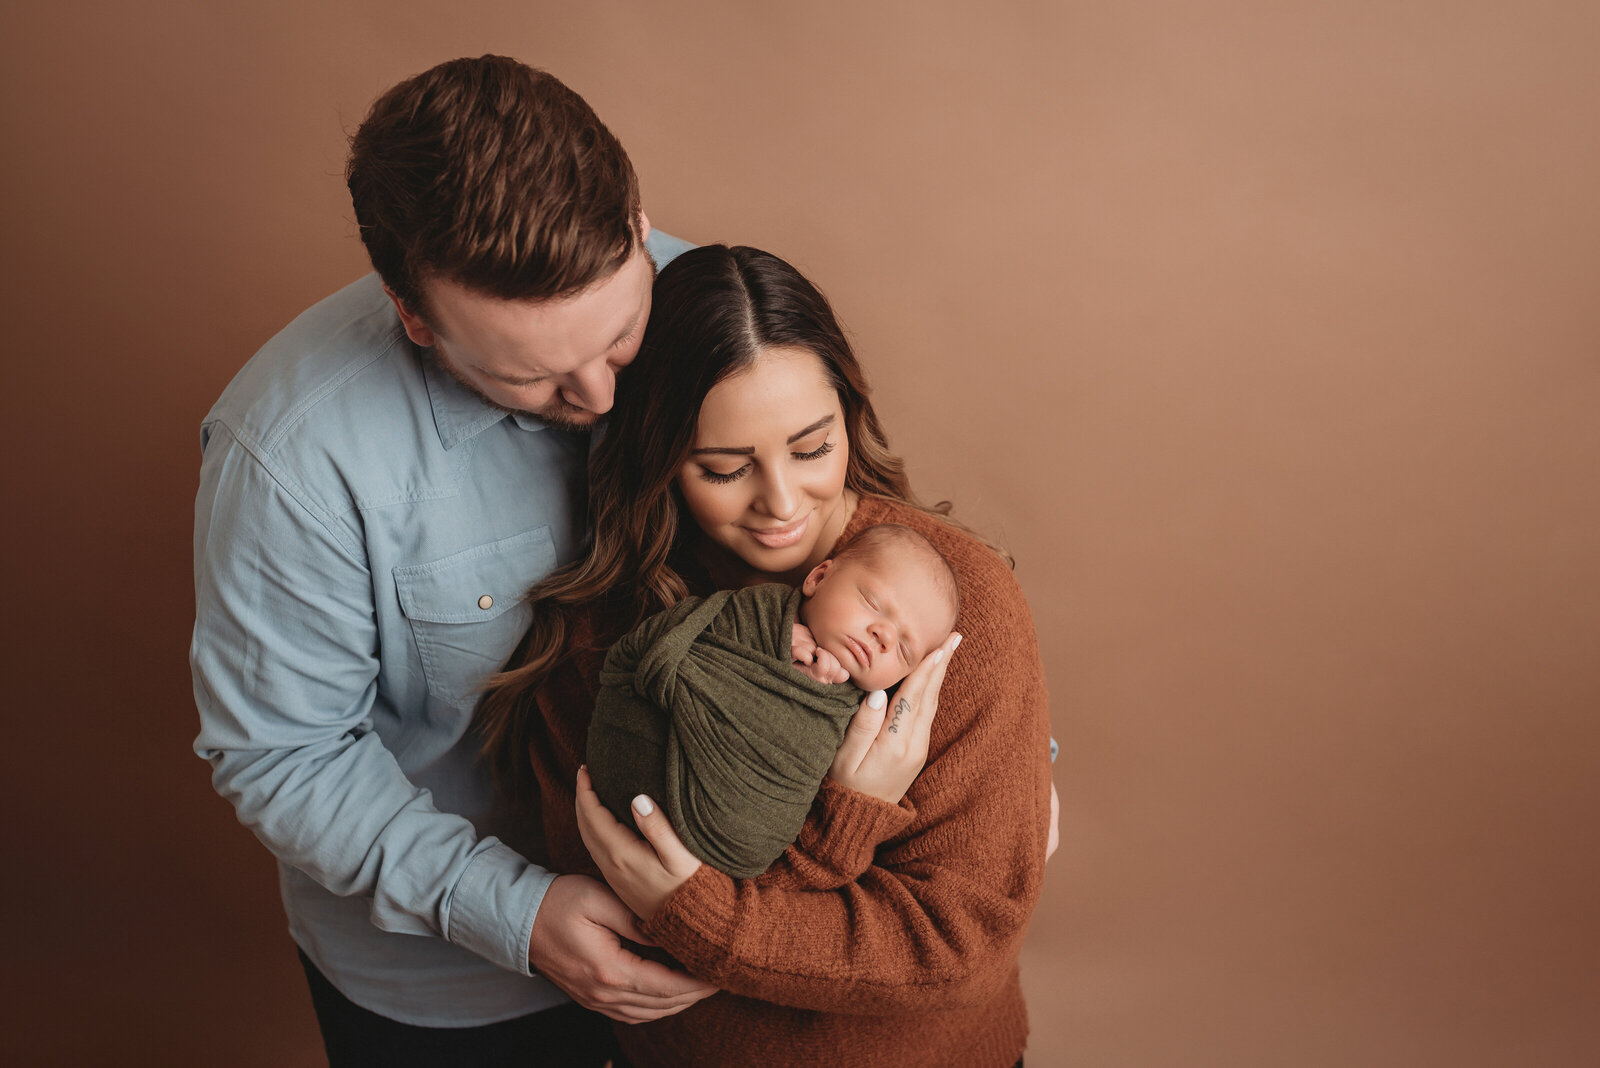 Newborn family portrait with mom holding baby. on tan backdrop. Family is wearing neutral colors of blue, brown and green.